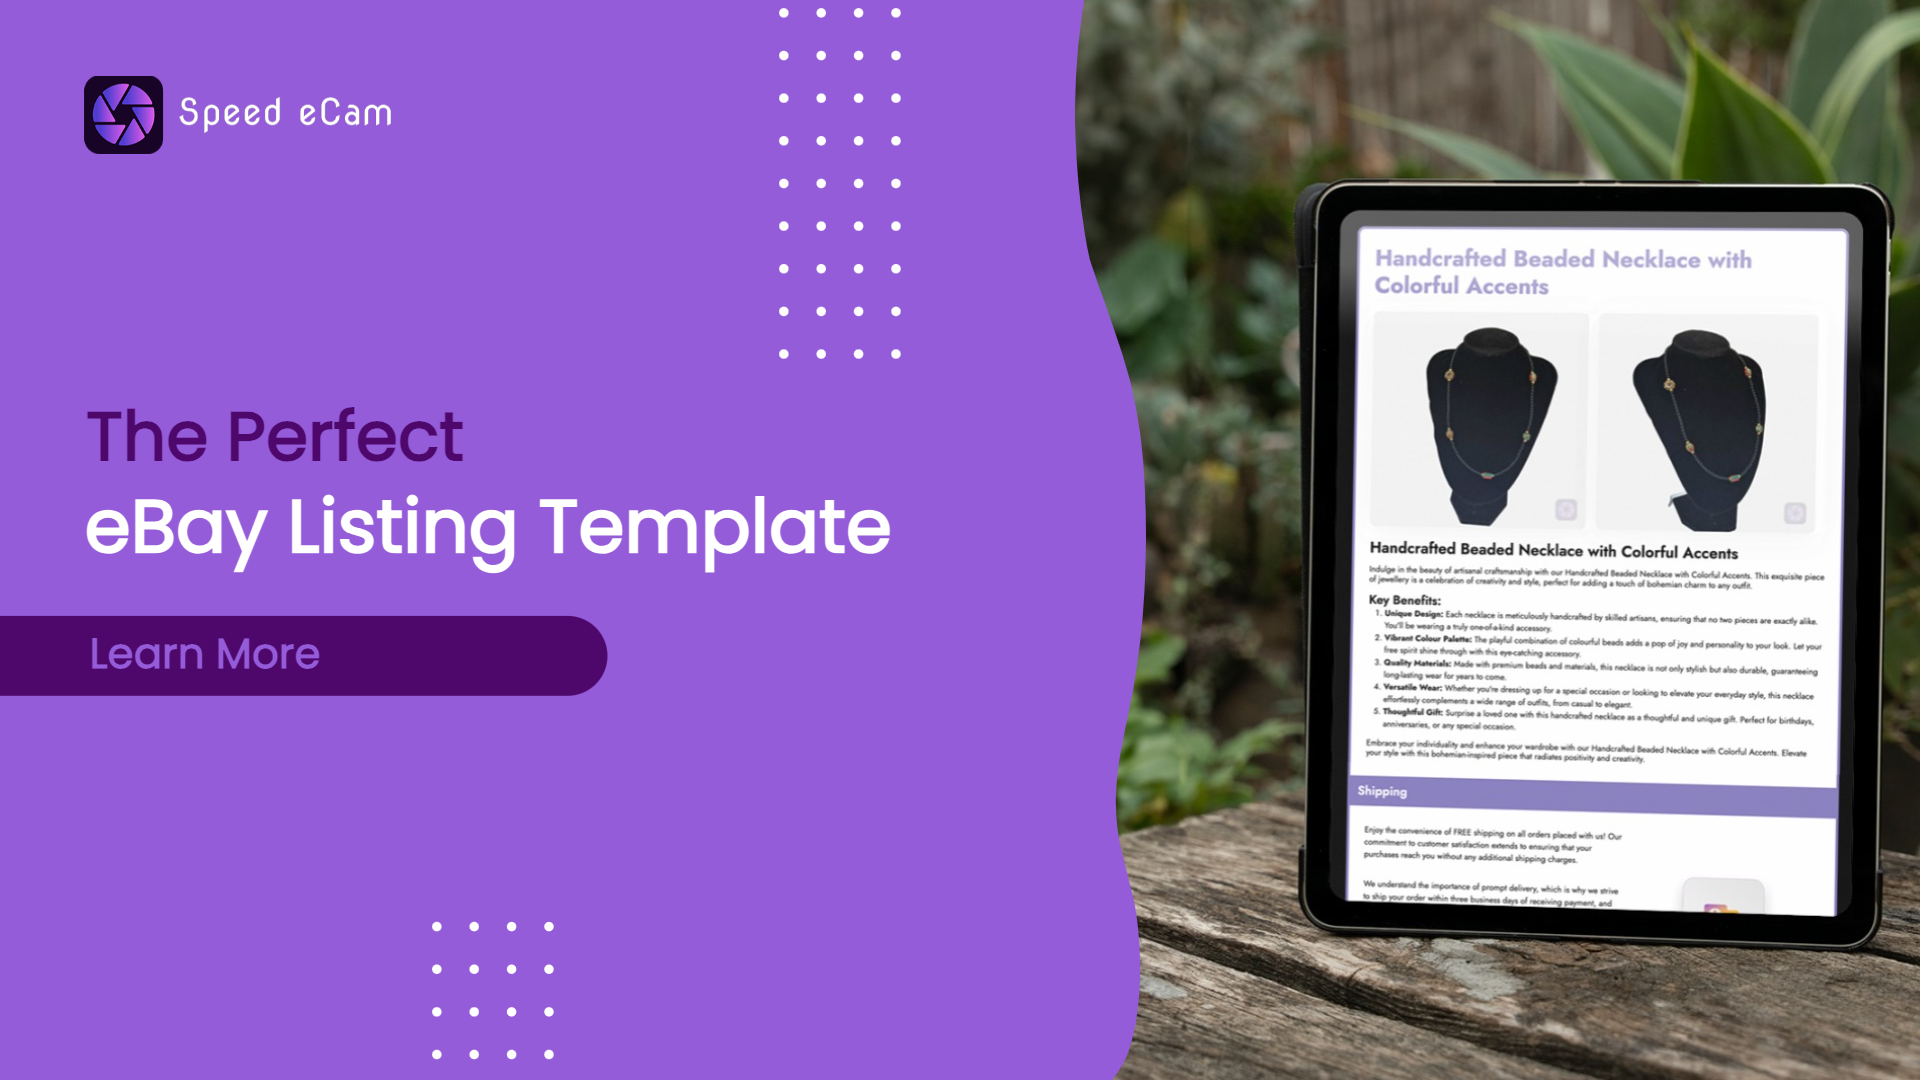 Designing the Perfect eBay Listing Template